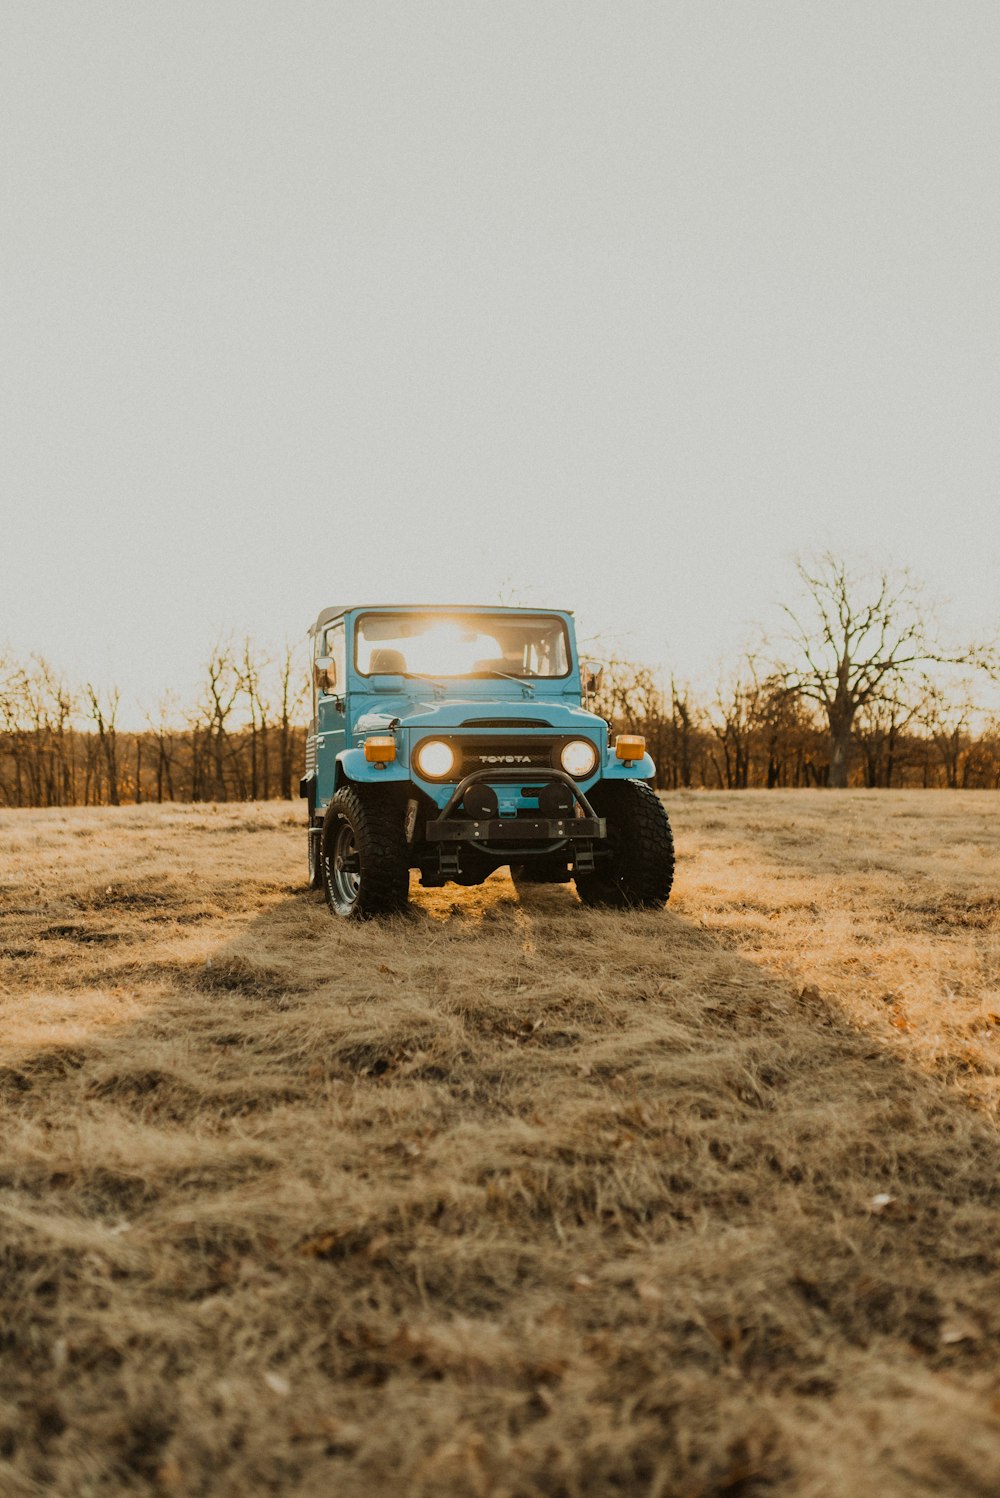 blue off-road vehicle on grass field